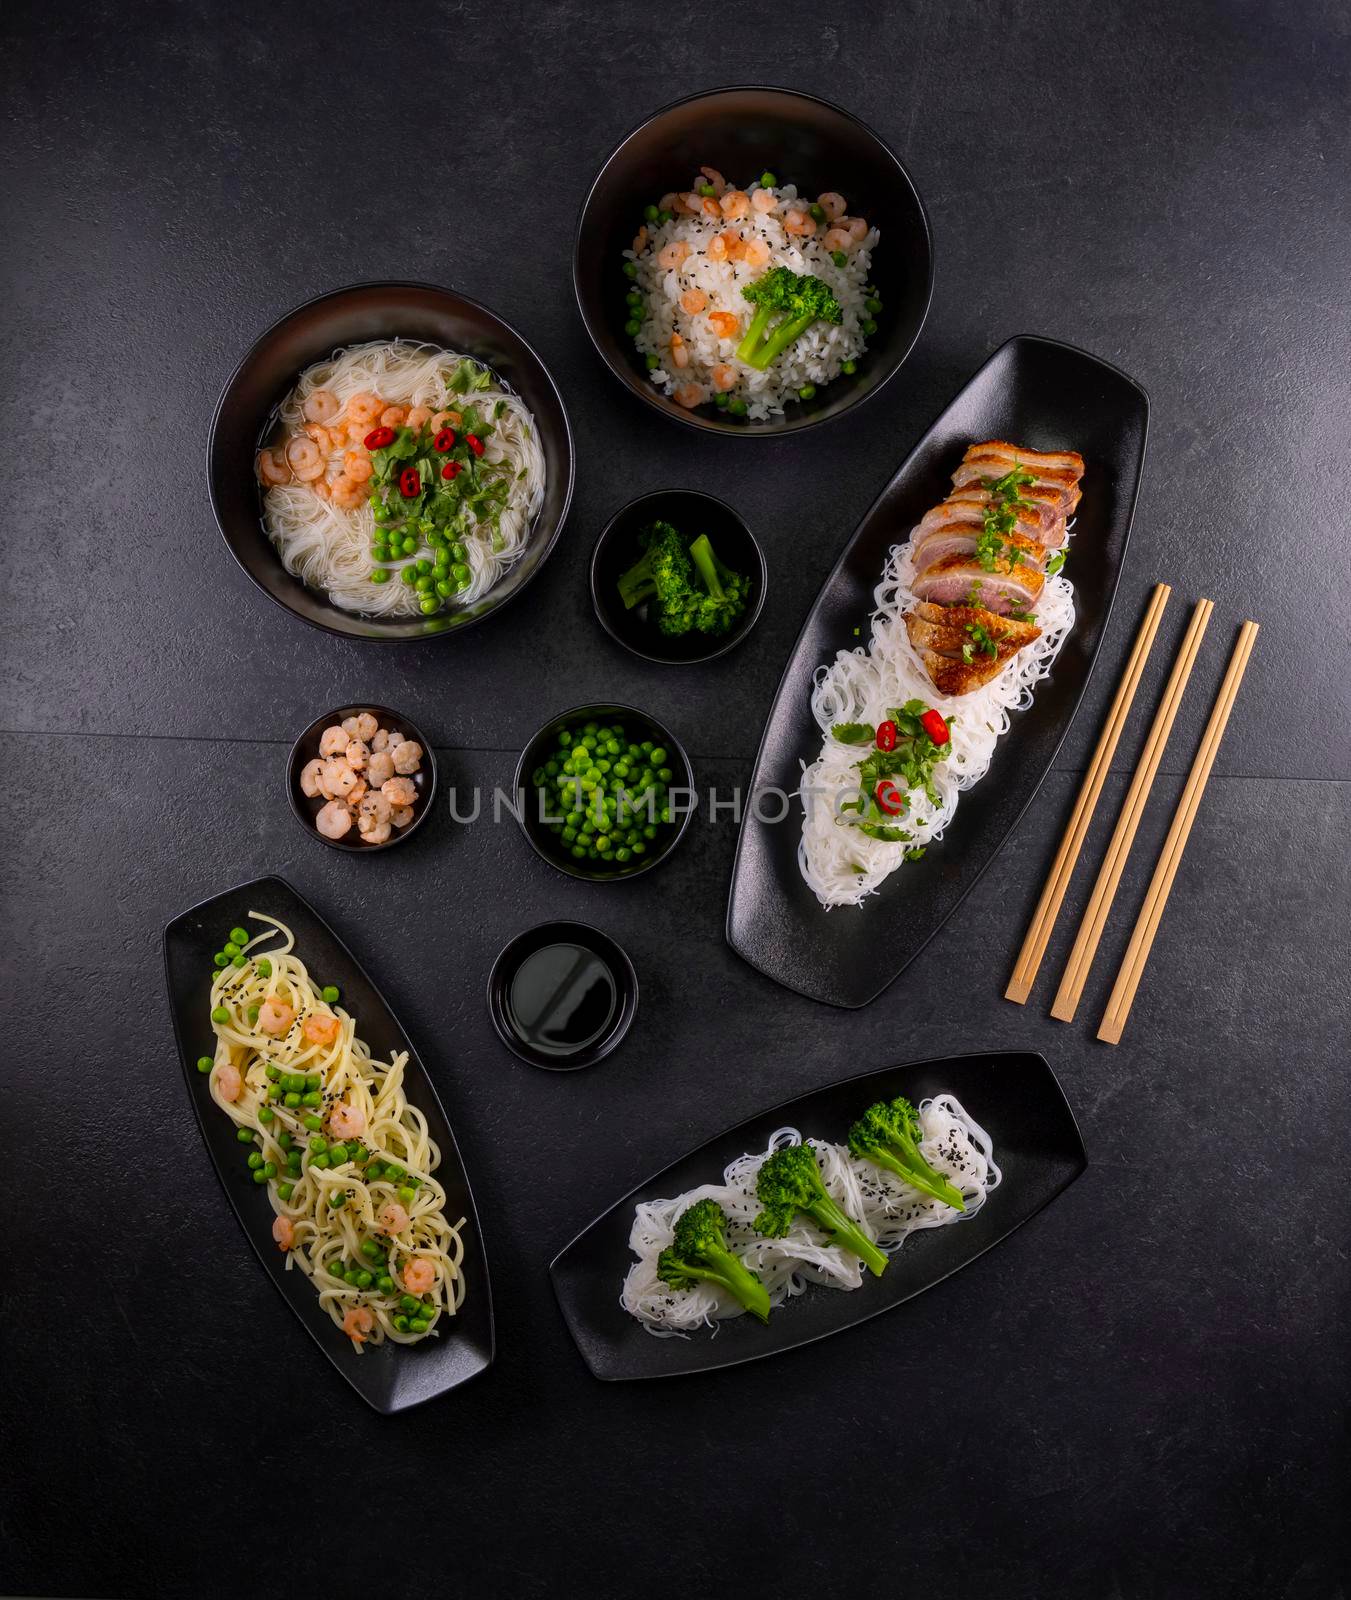 Various dishes of Asian cuisine with different types noodles and rice with shrimp, vegetables and black sesame